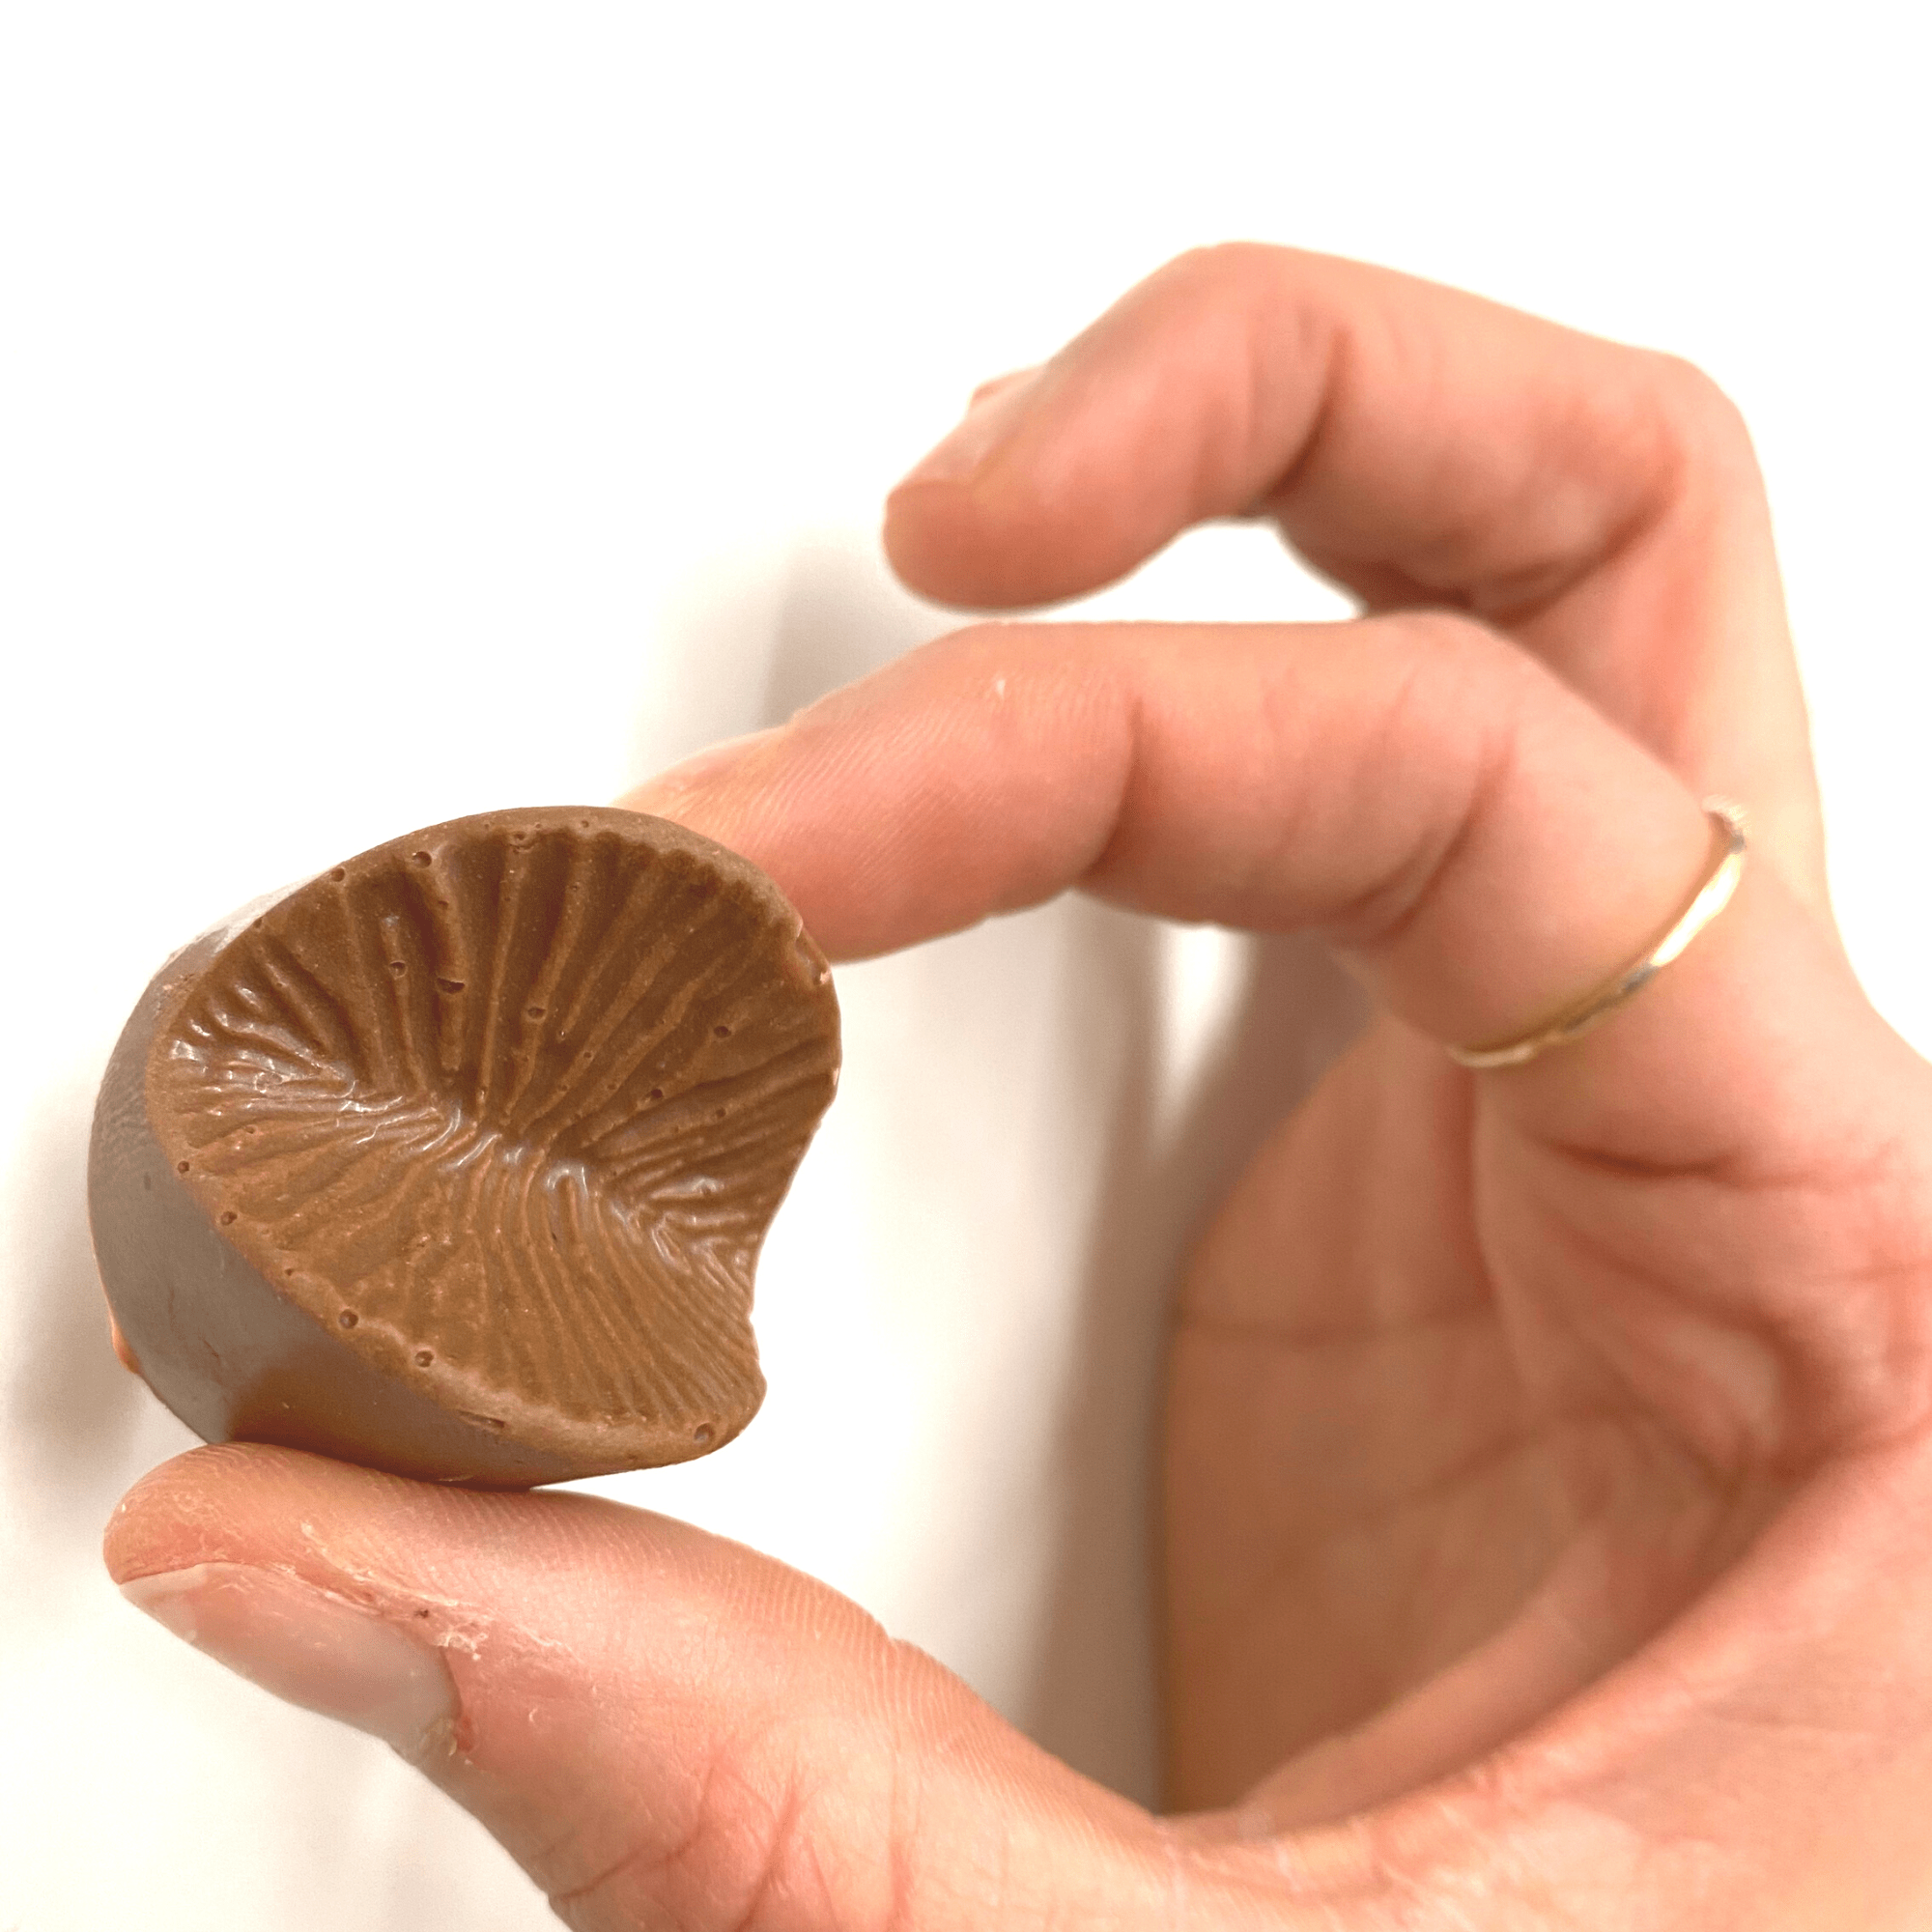 Edible Anus, The Funniest Chocolate Gift, 100% anonymous